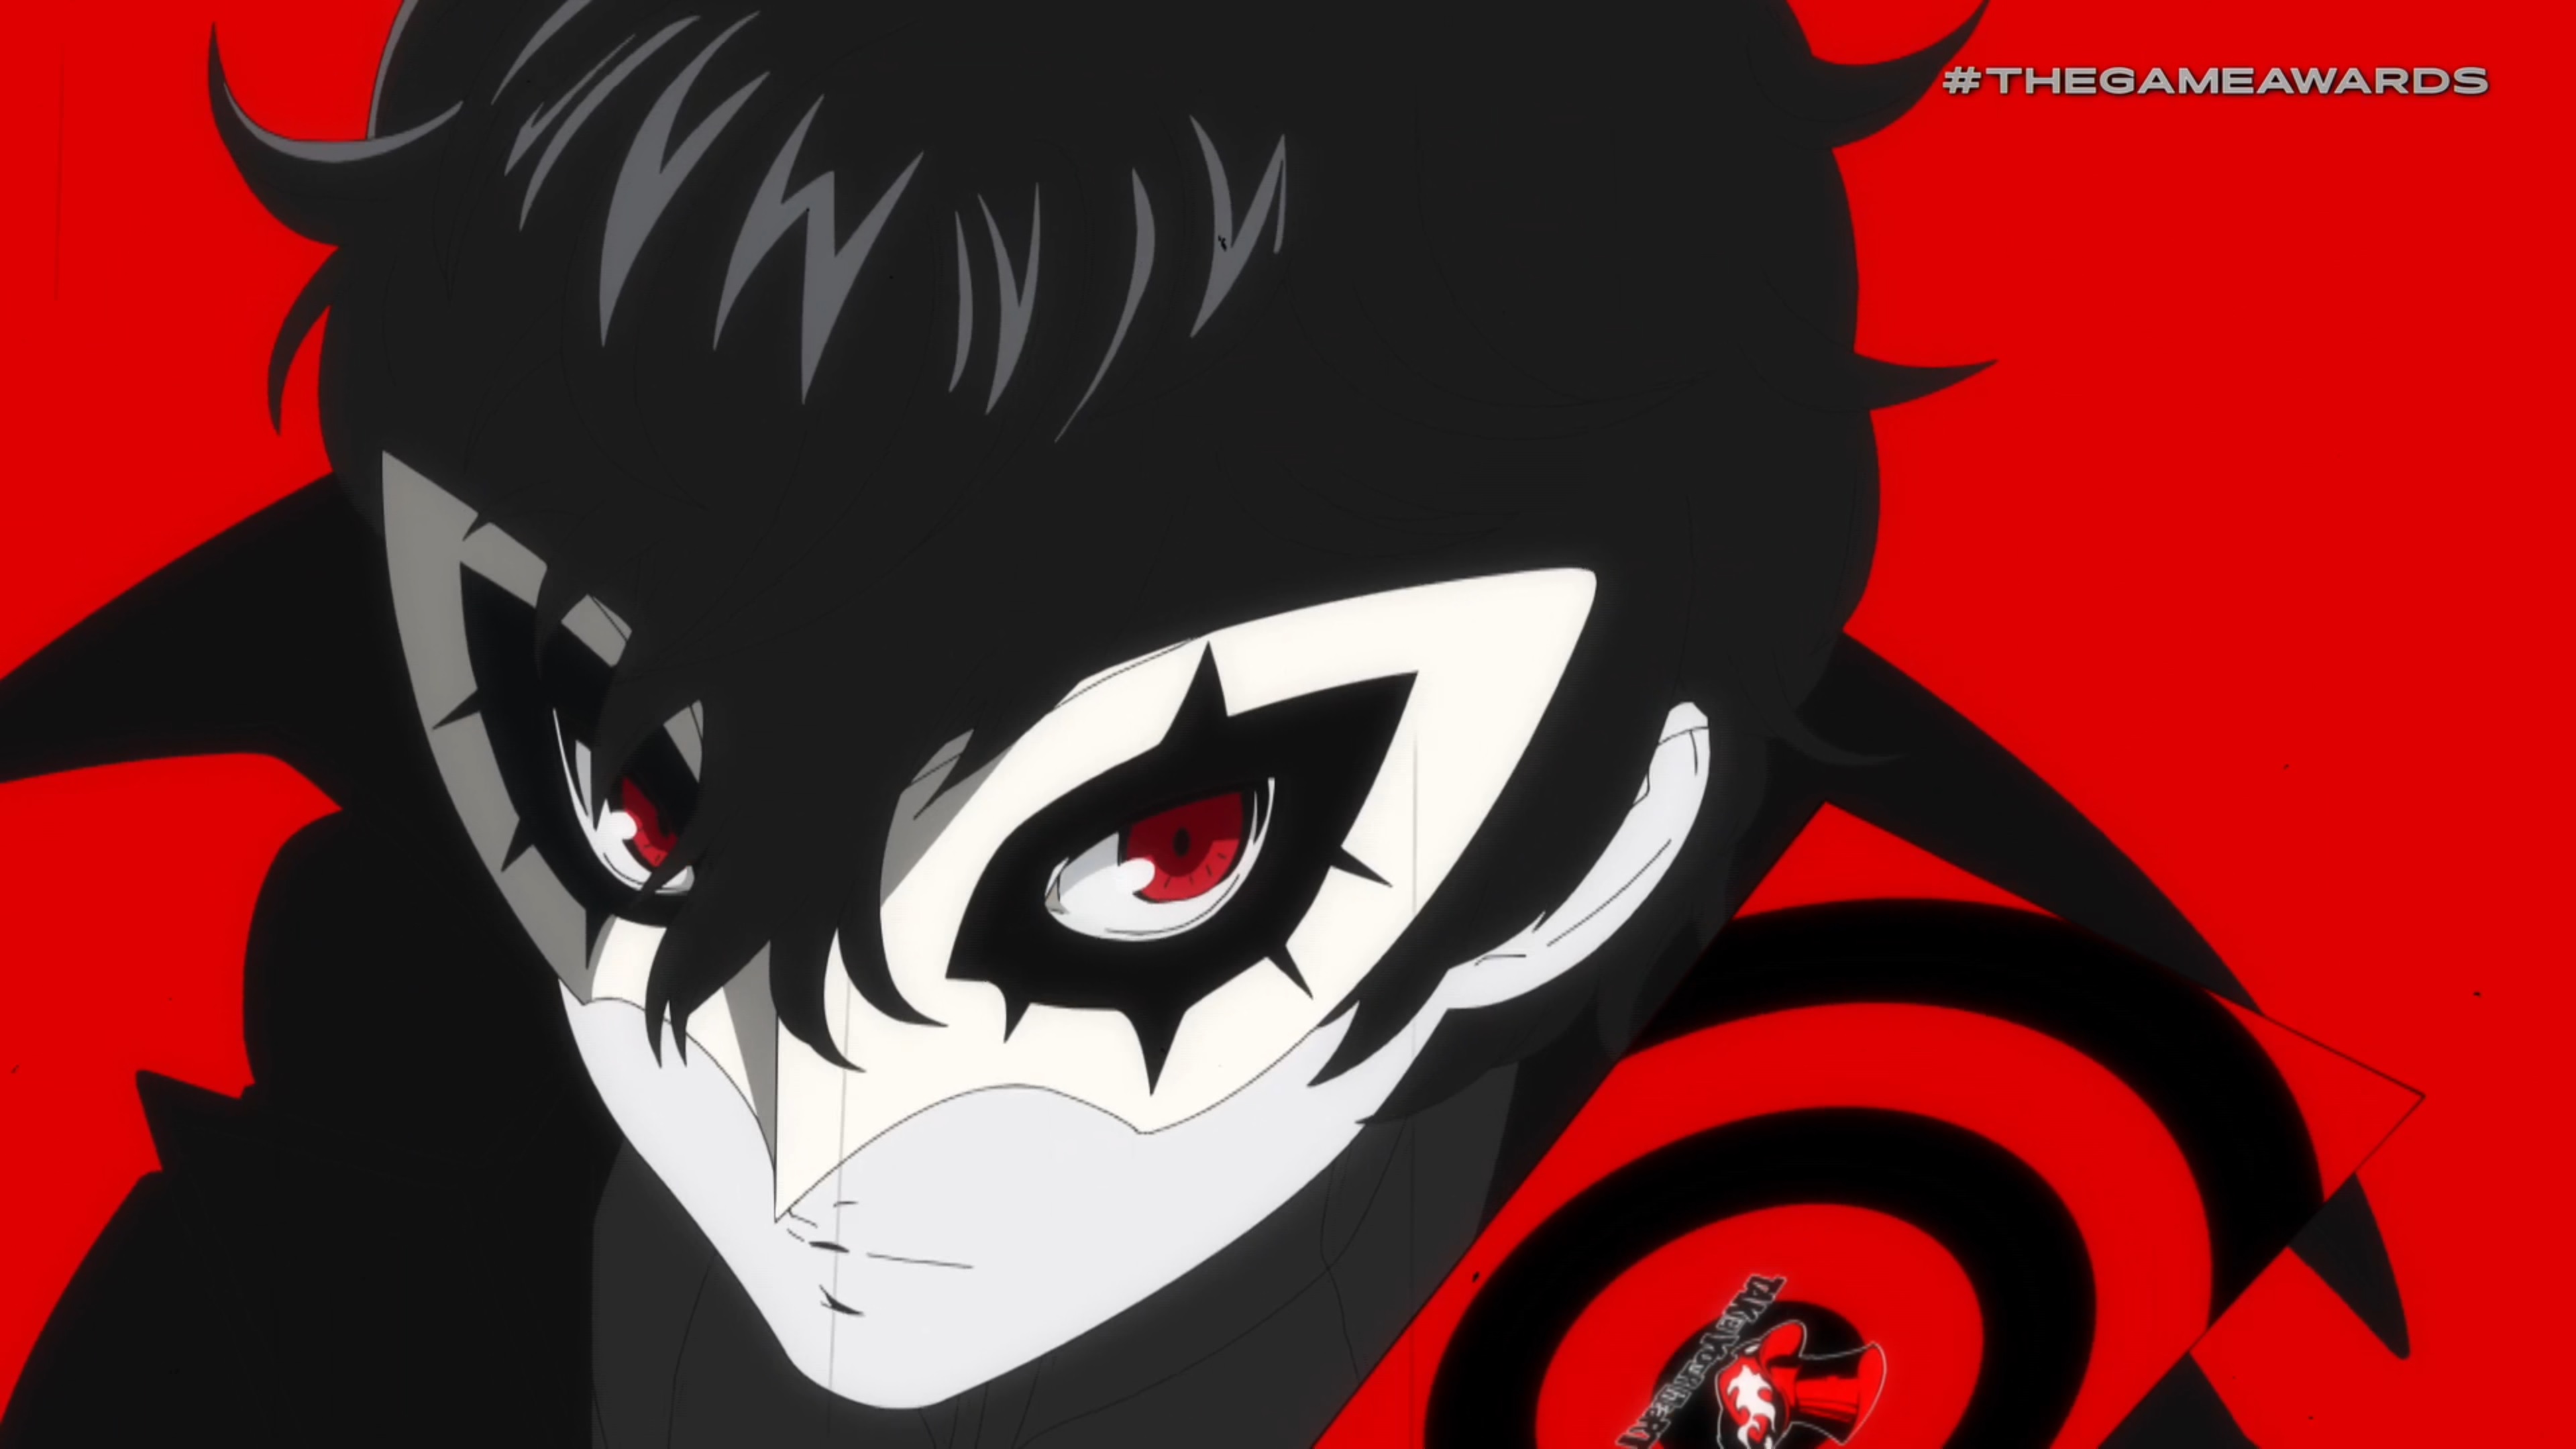 Super Smash Bros. Ultimate reveals Joker from Persona 5 as first DLC